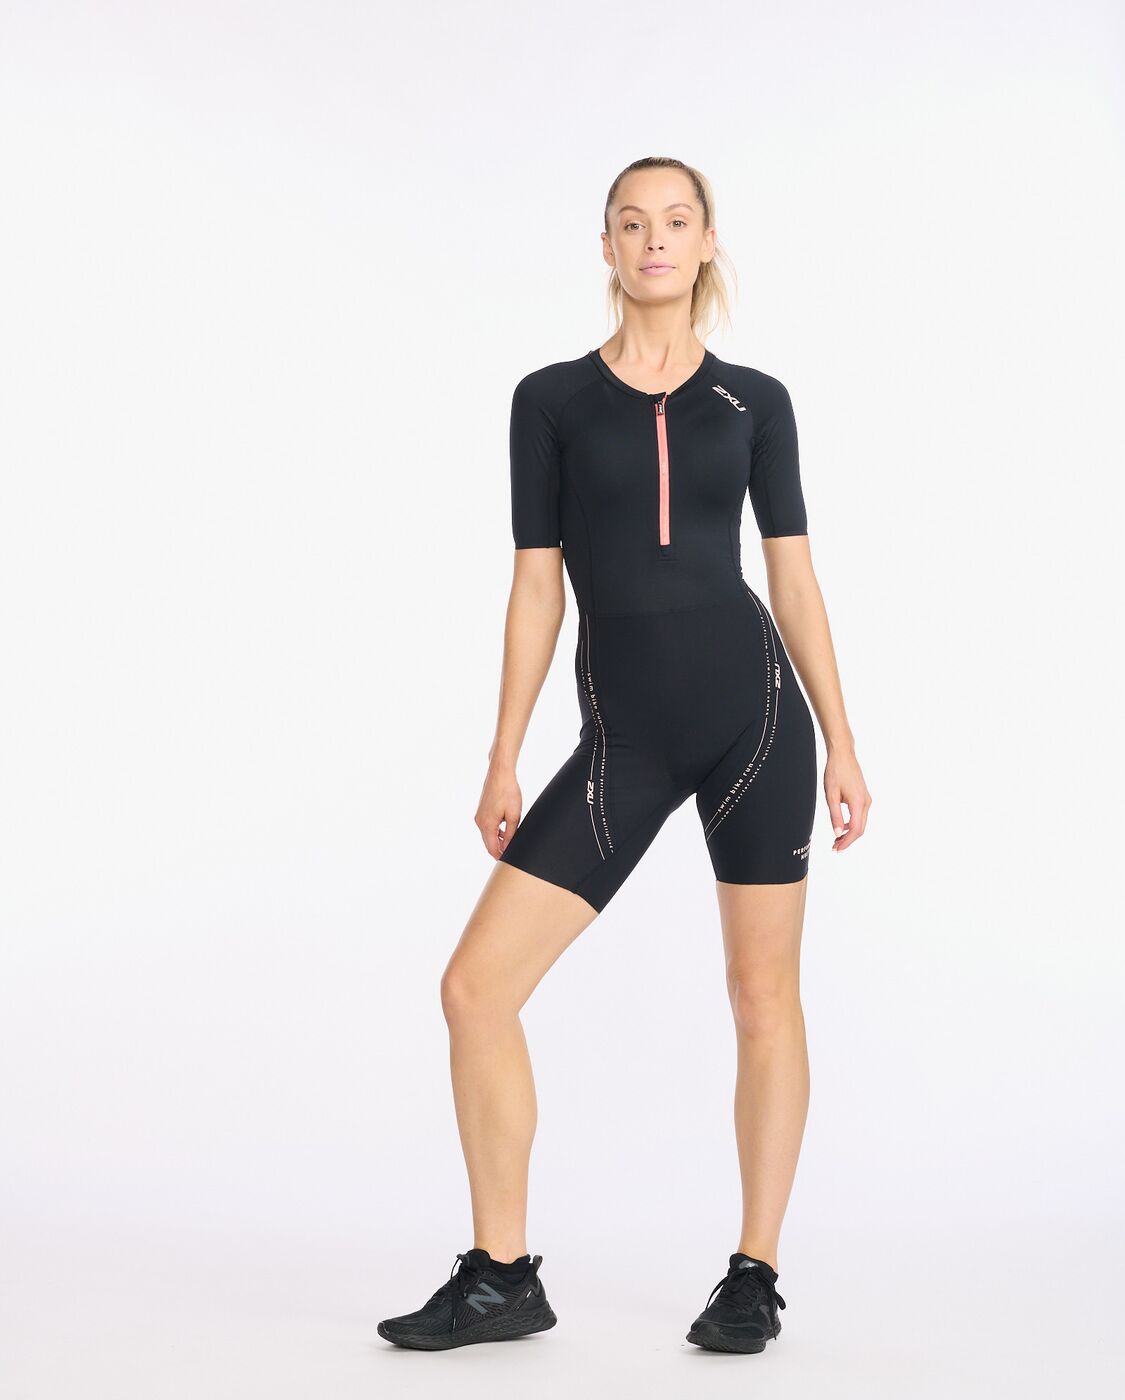 2XU South Africa - Womens Aero Sleeved Trisuit - India Ink/White